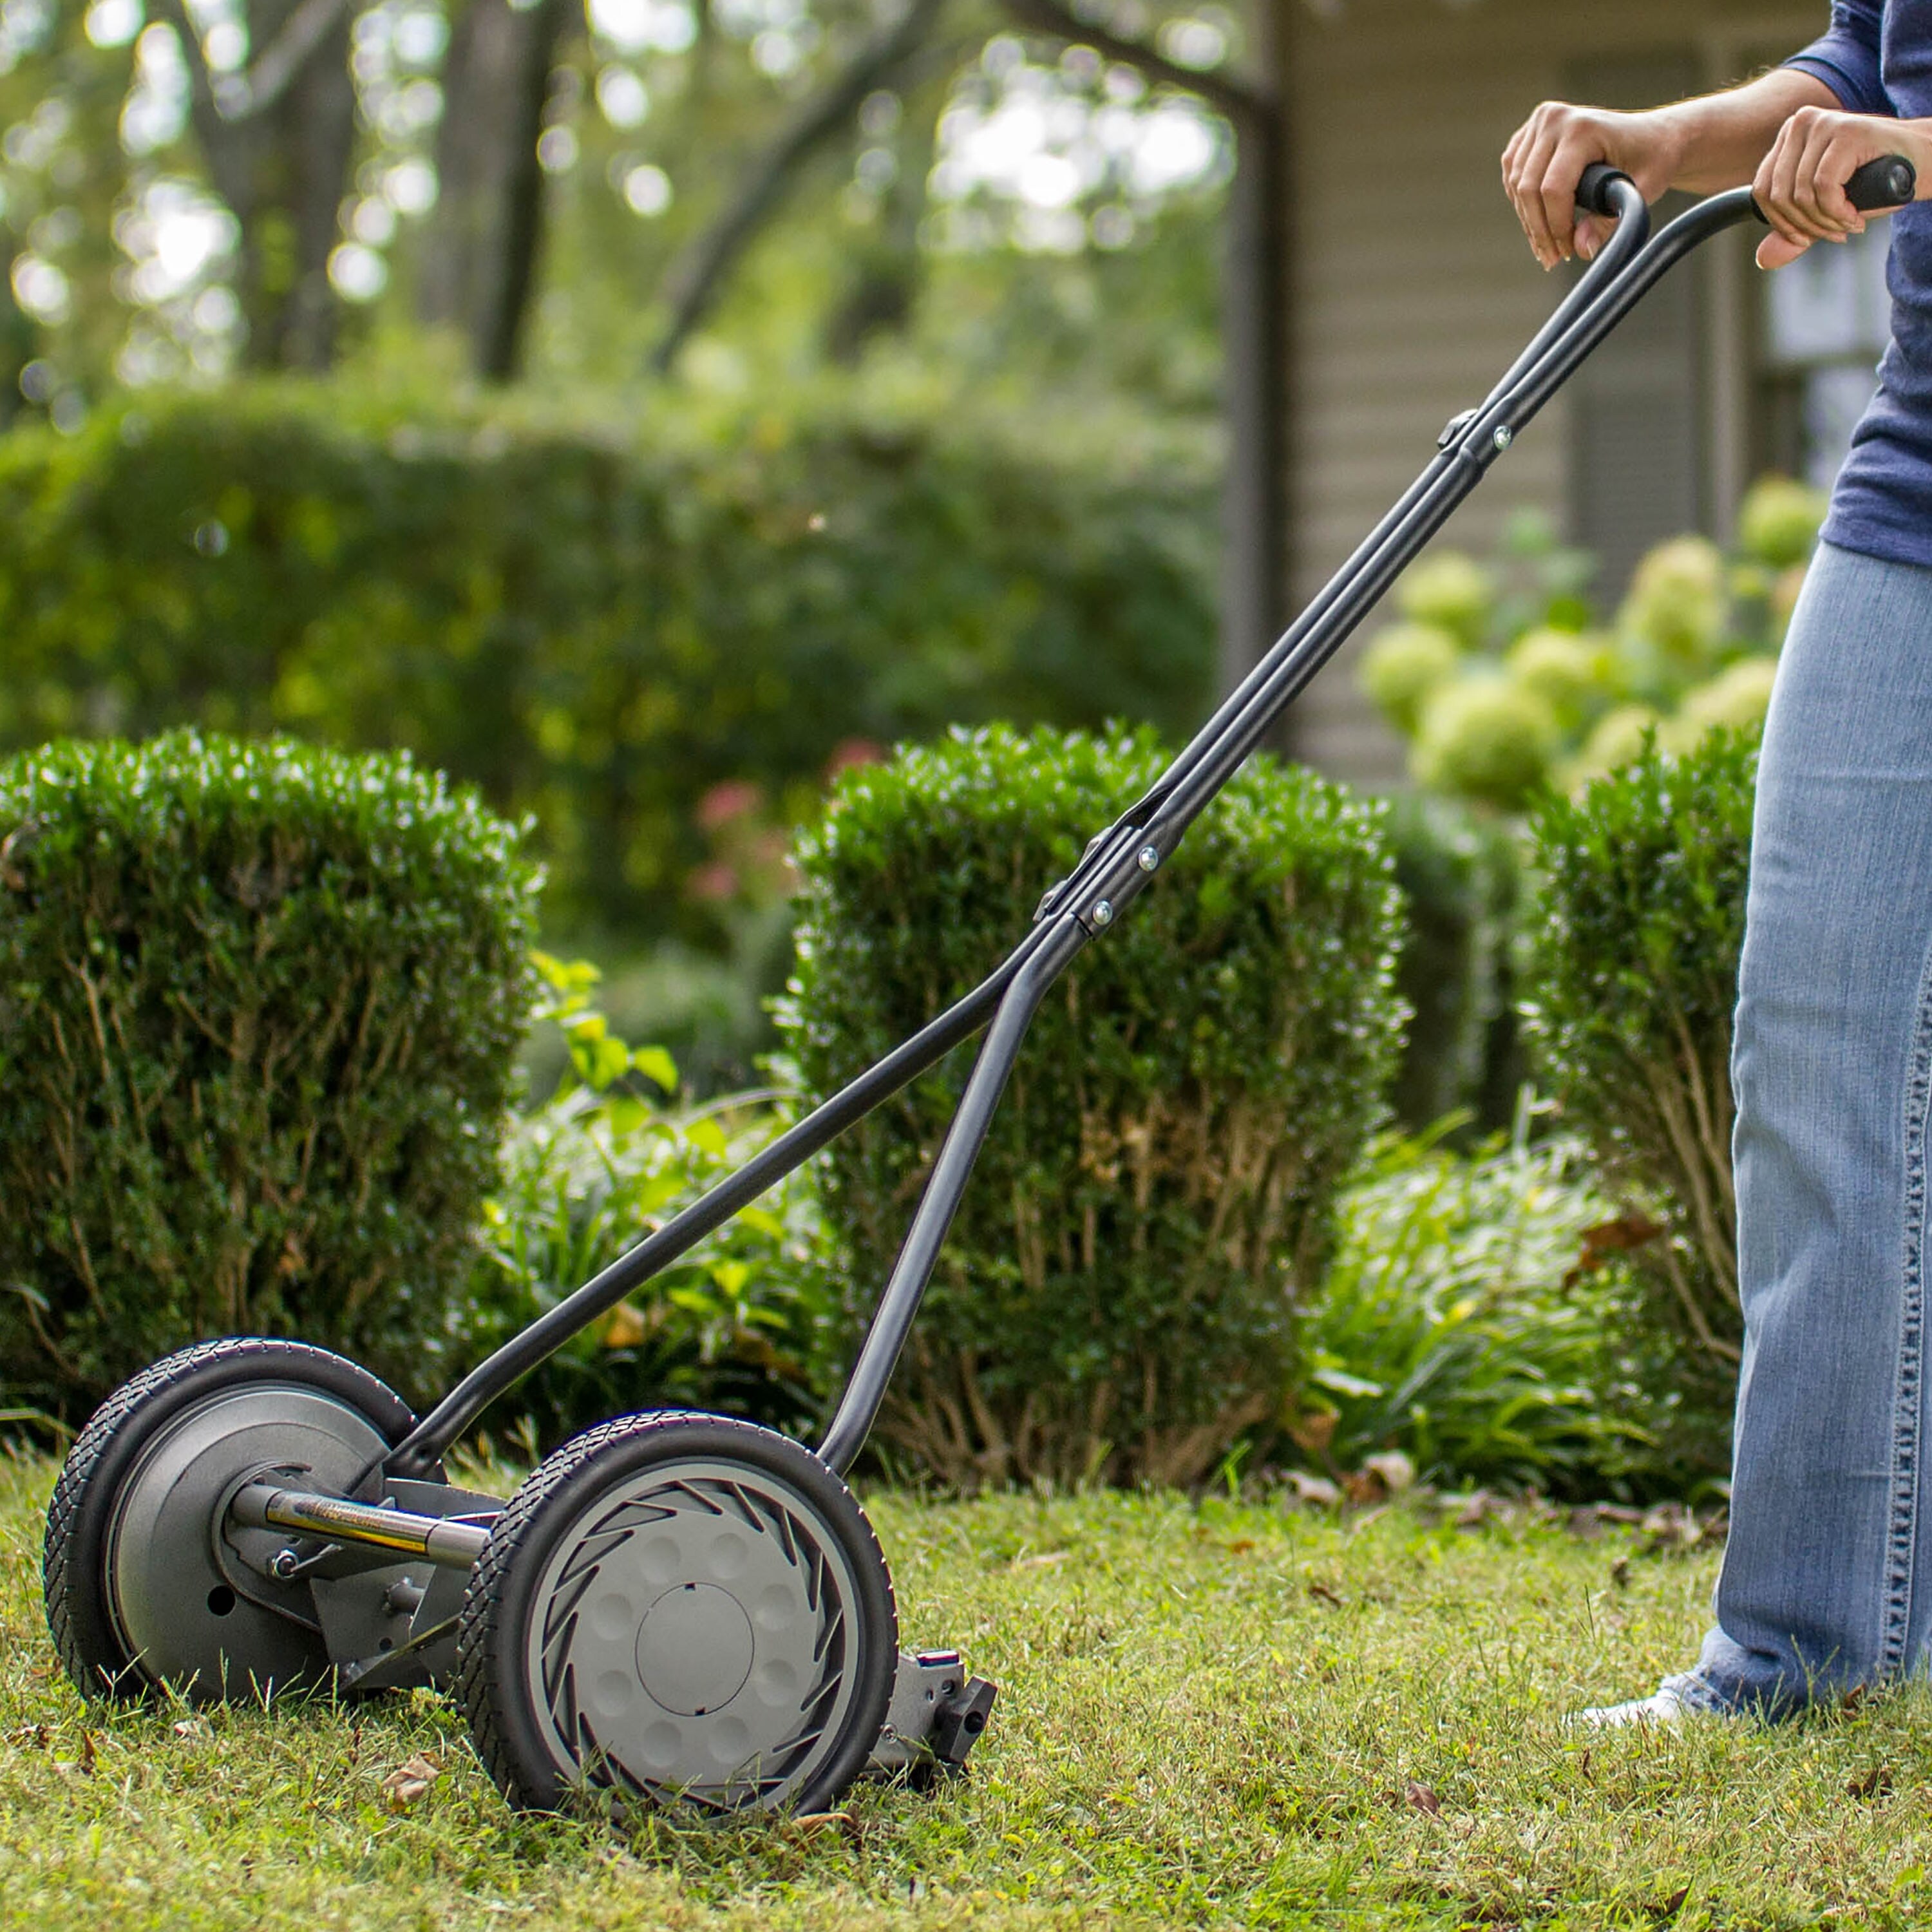 Pros and Cons of a Push-Reel Mower